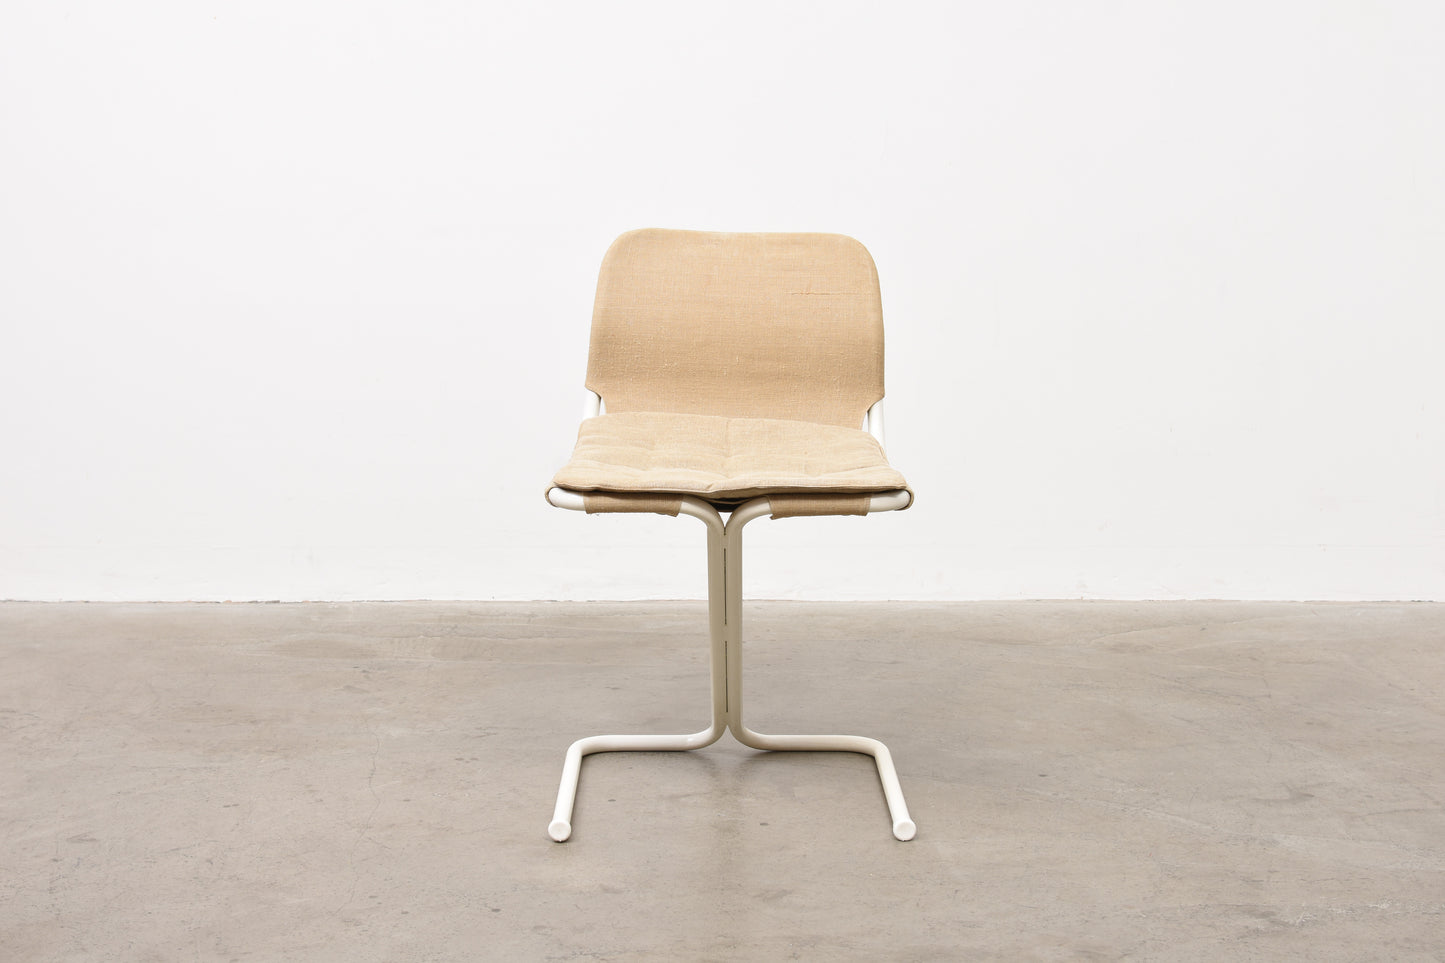 Set of metal + canvas chairs by Ekstrand & Norman